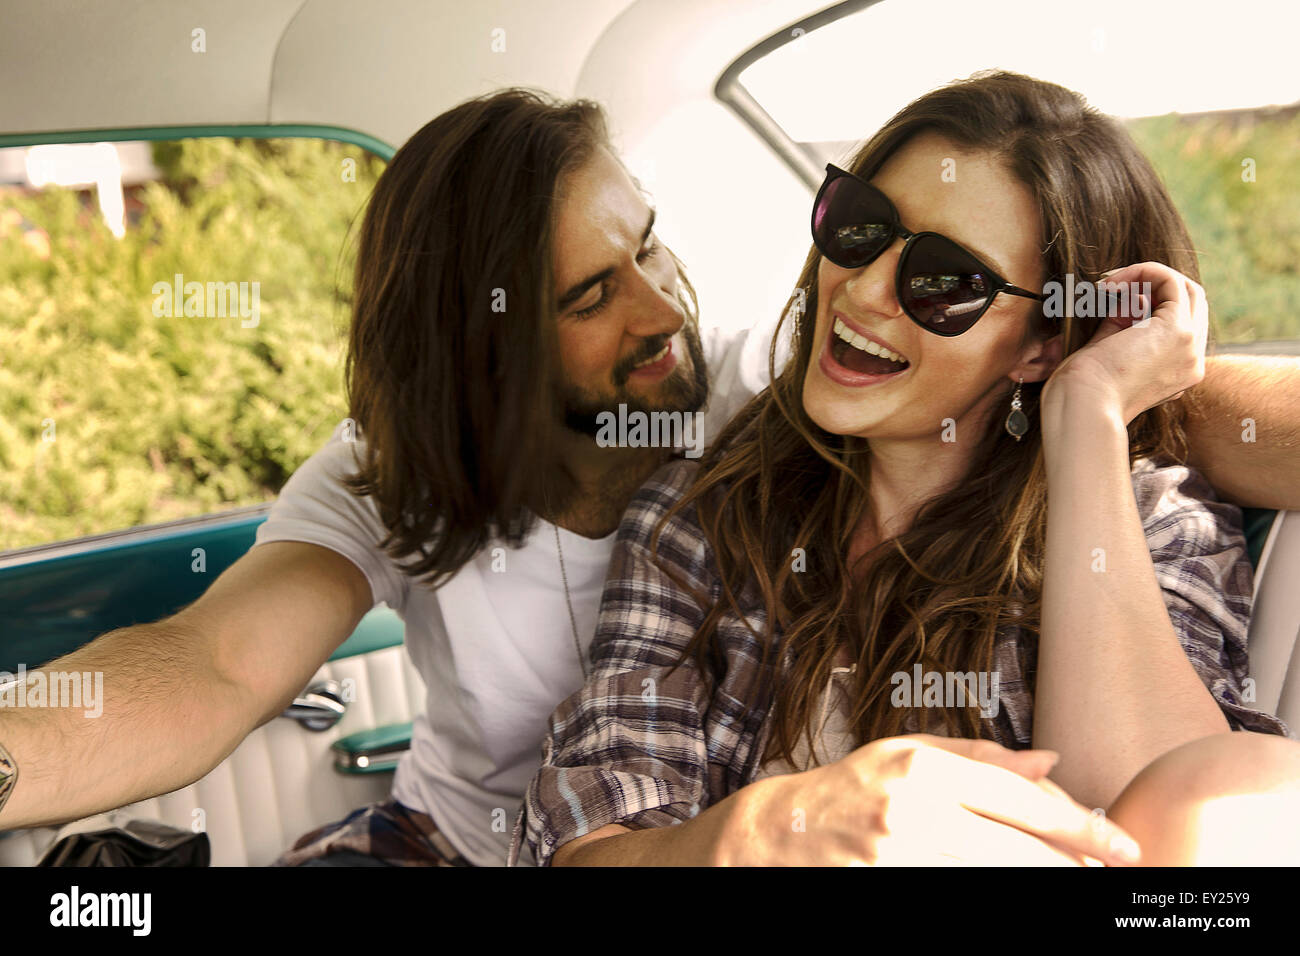 Young couple laughing in back seat of car Stock Photo